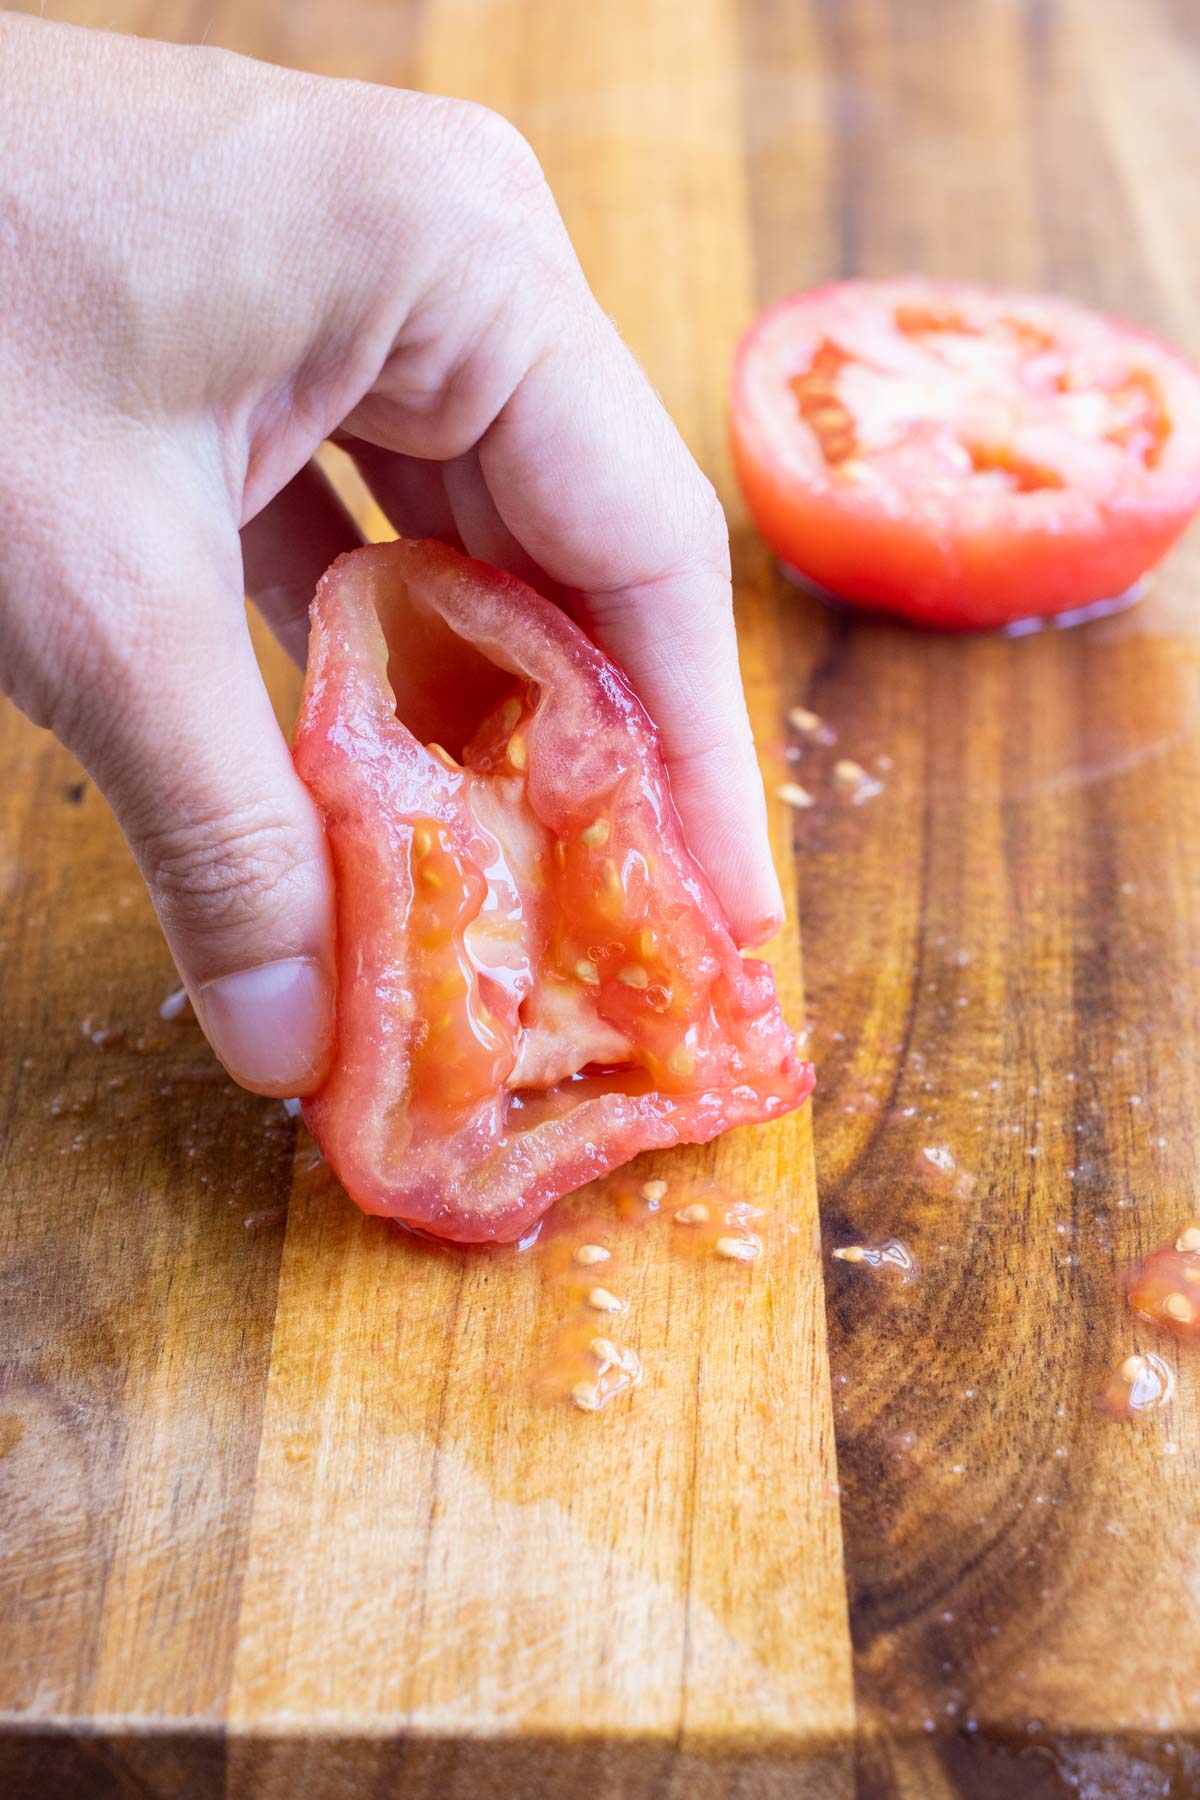 Removing the seeds from a tomato is simple.